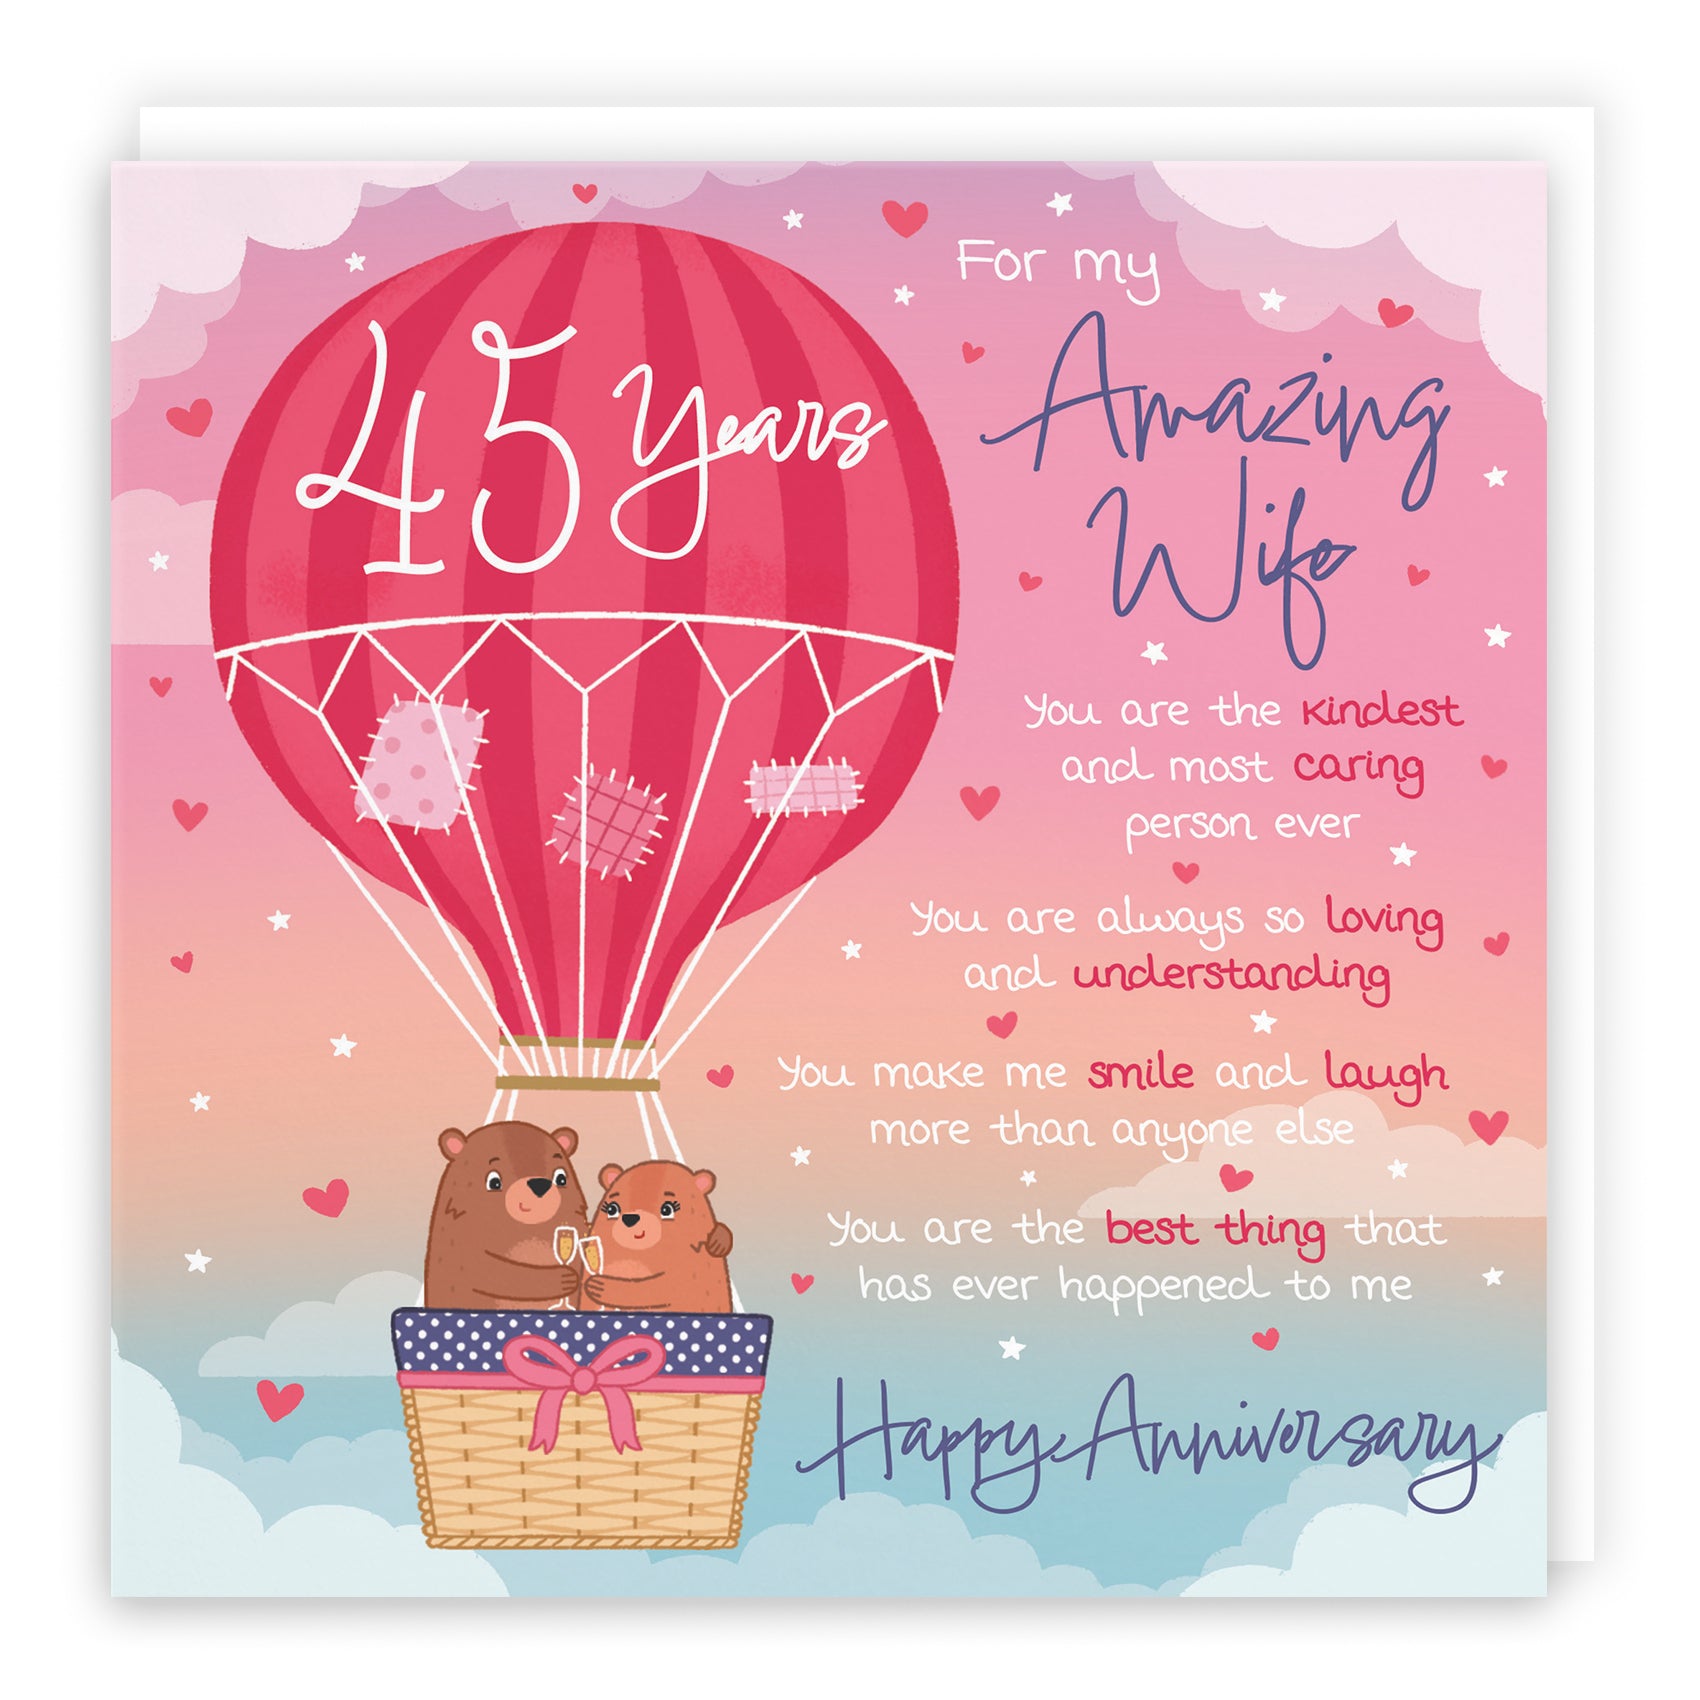 Wife 45th Anniversary Poem Card Love Is In The Air Cute Bears